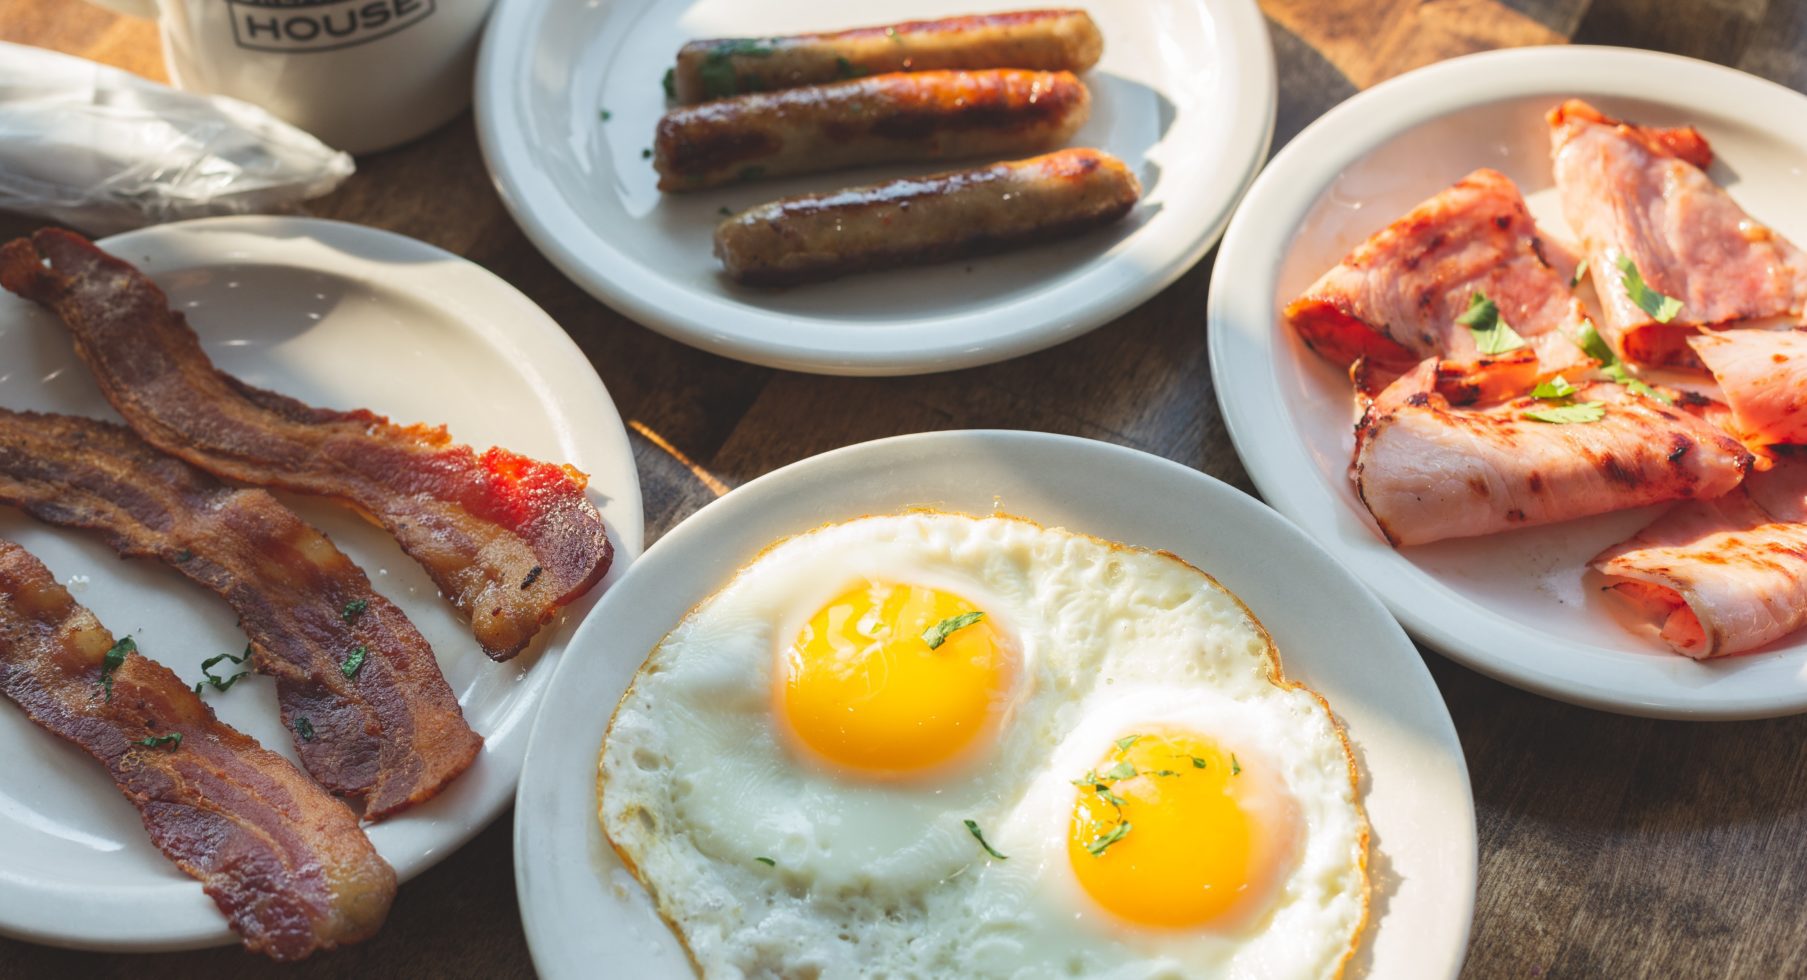 Diverse breakfast options arranged on the table, appealing to a variety of tastes.